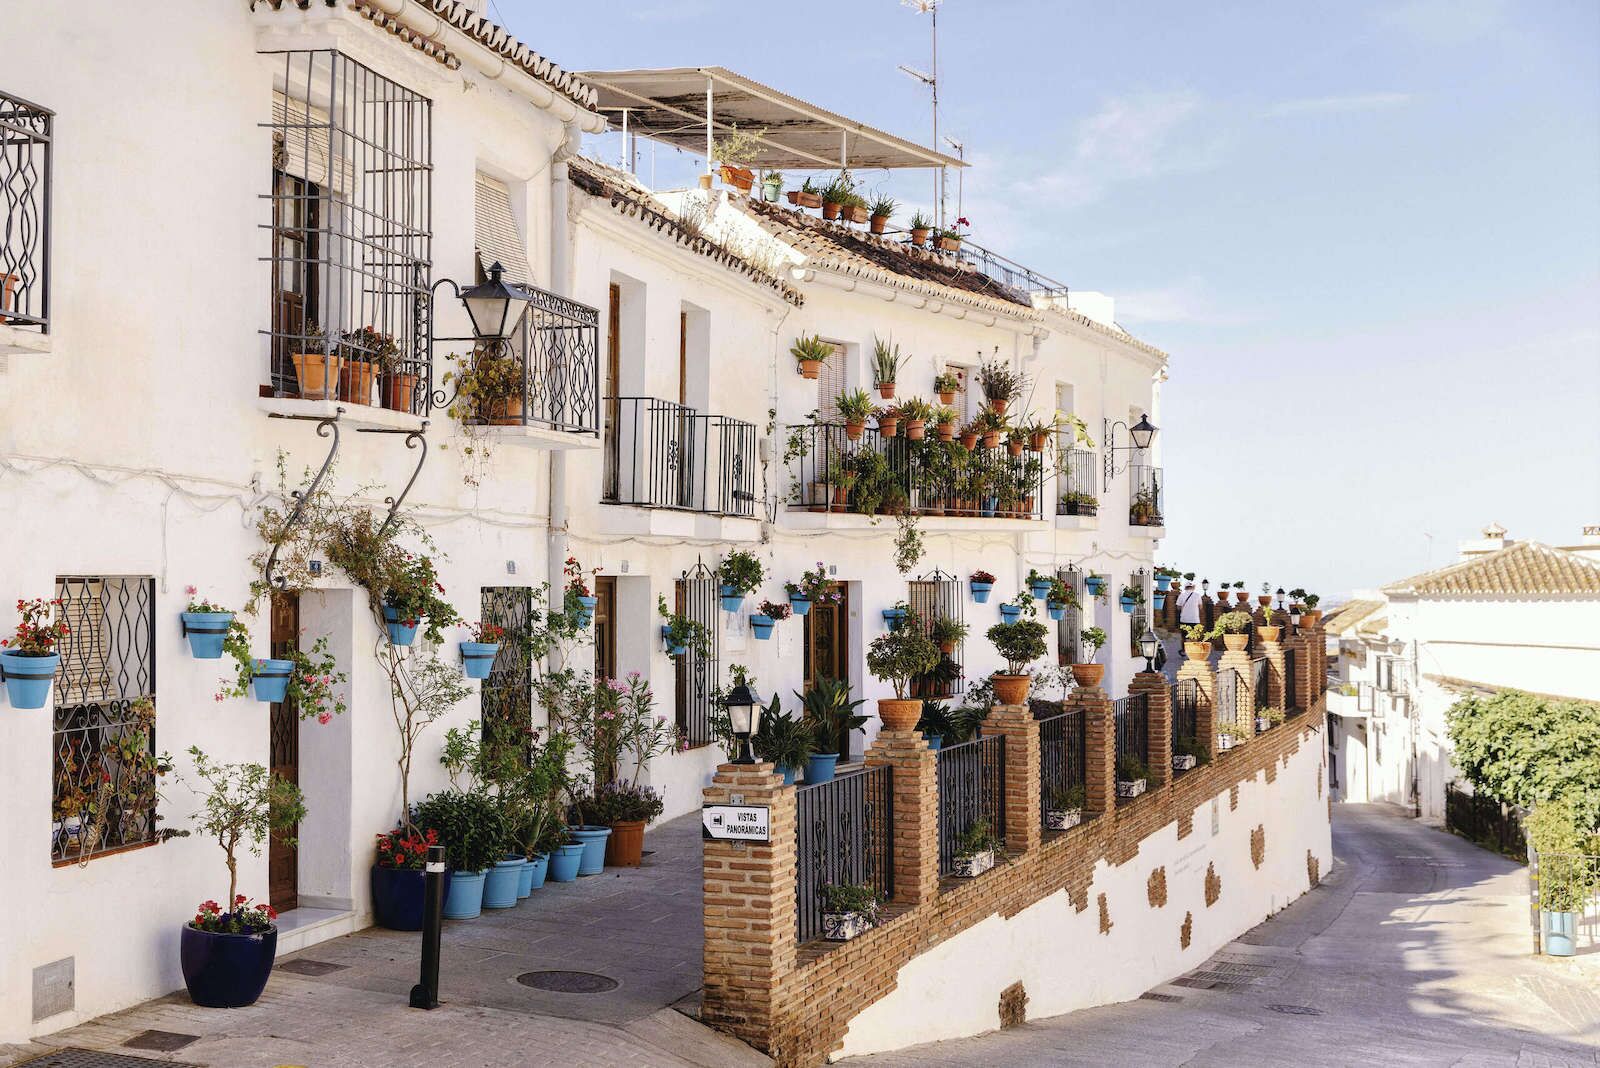 buildings in the town of Marbella with terraces and flowers in the windows